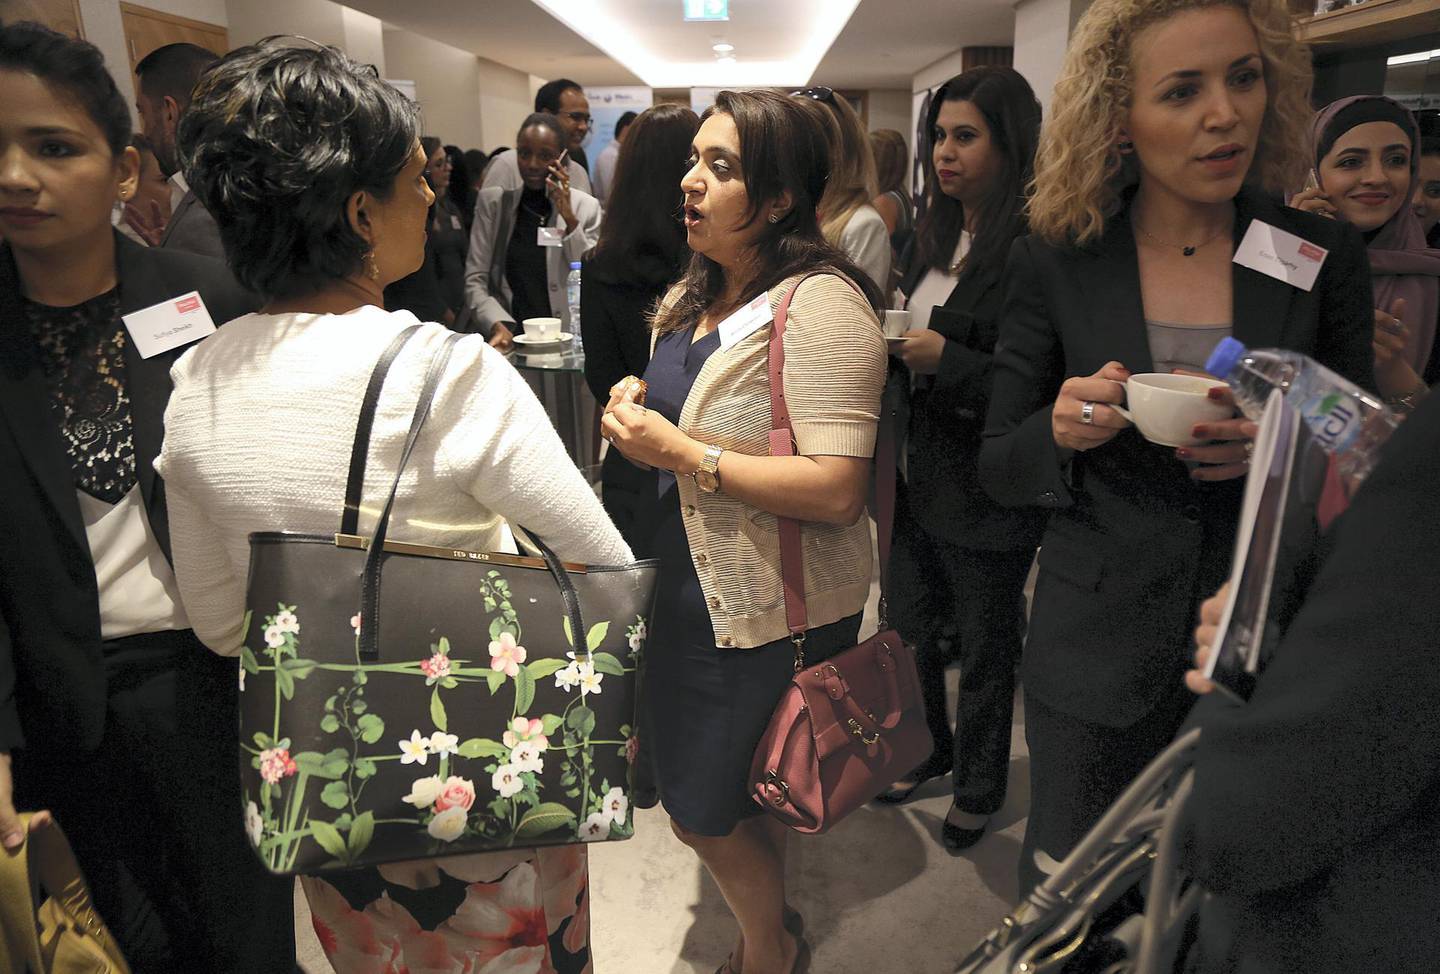 Dubai, March 01,2018: Visitors at The Return to Work Career Fair in Dubai. Satish Kumar for the National/ Story by Alice